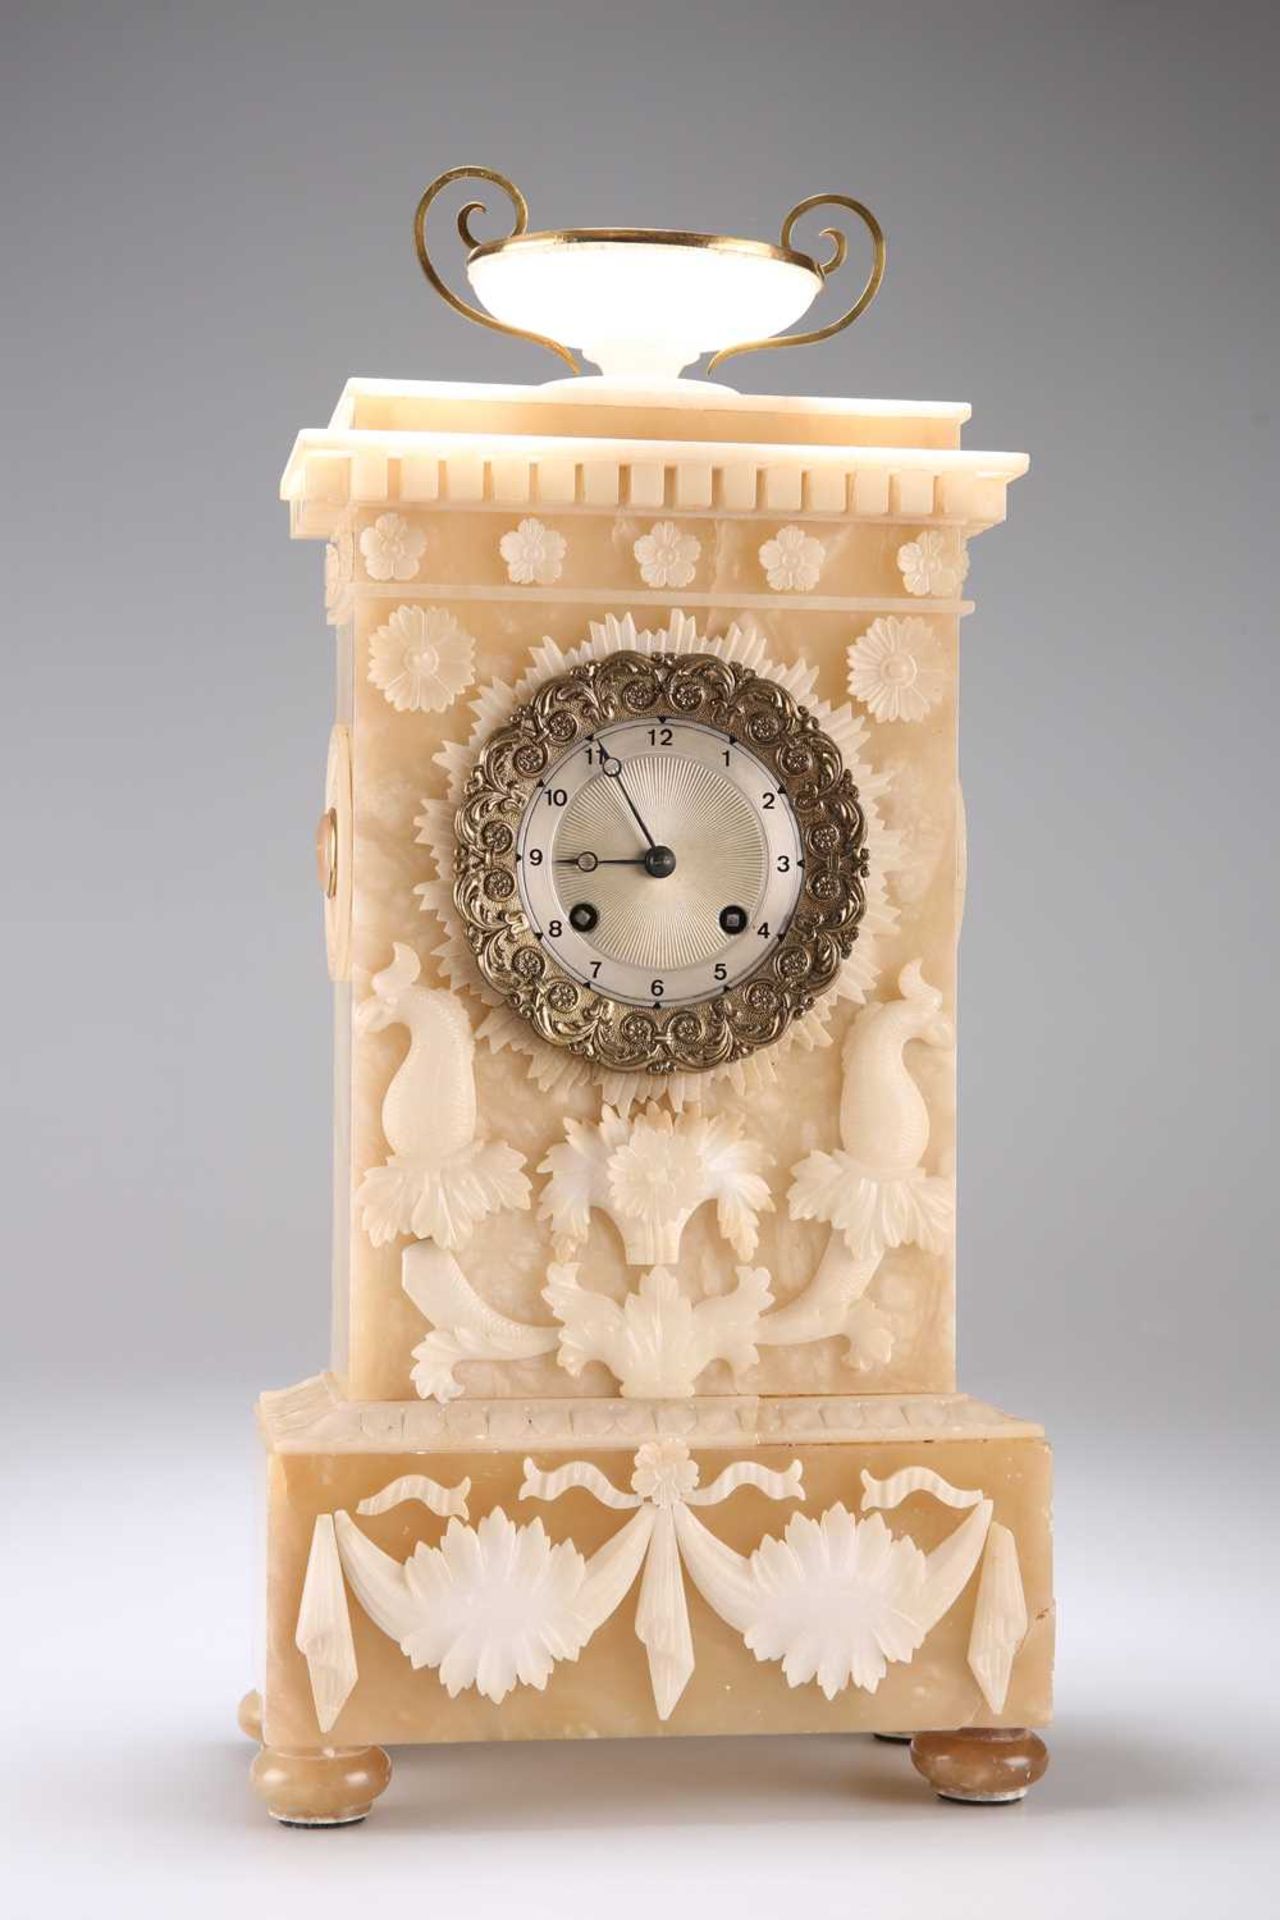 A FRENCH ALABASTER MANTEL CLOCK, 19TH CENTURY